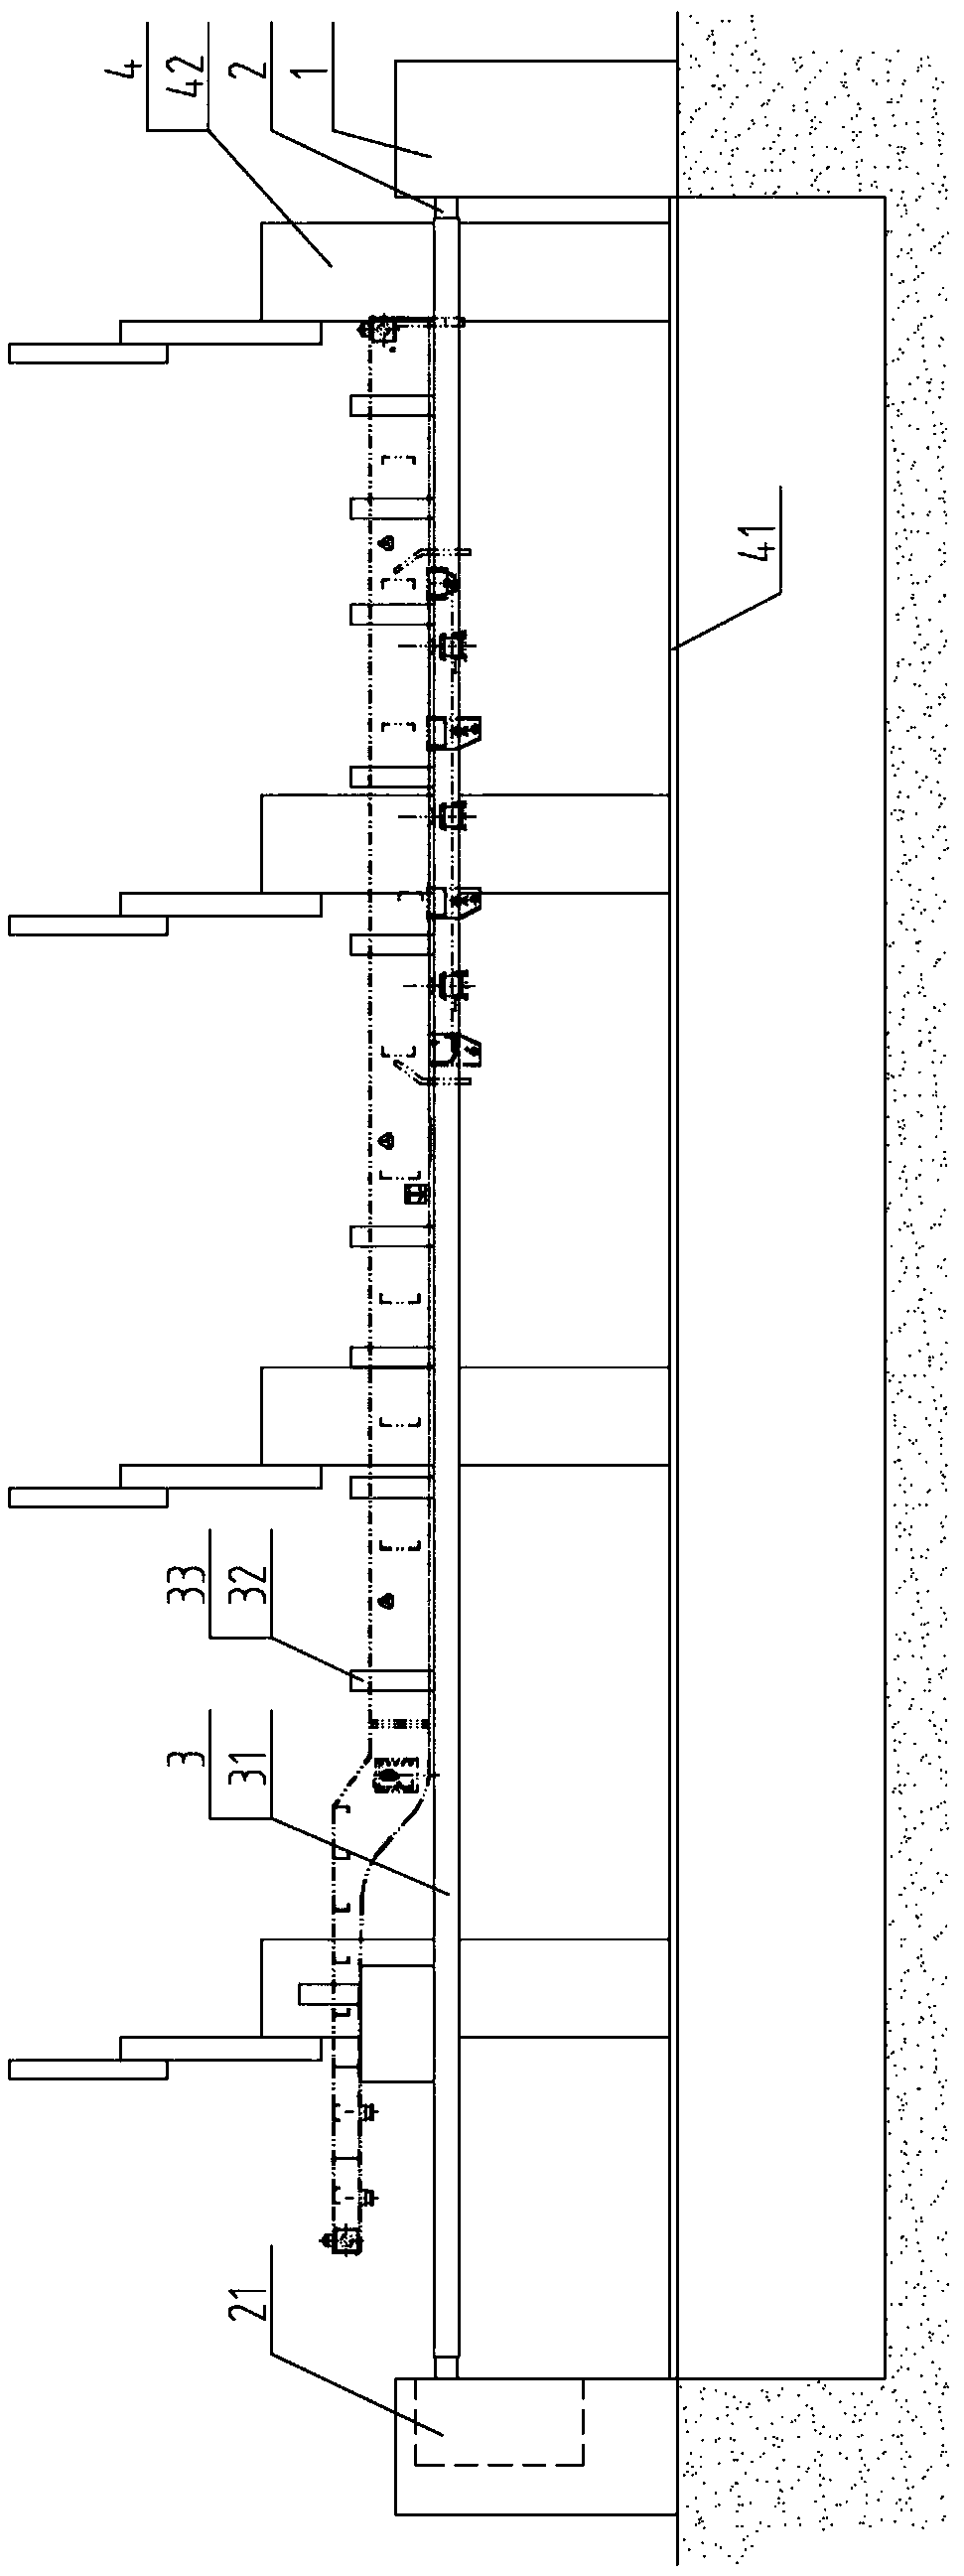 Plate positioning part of a trailer frame assembly assembly welding system